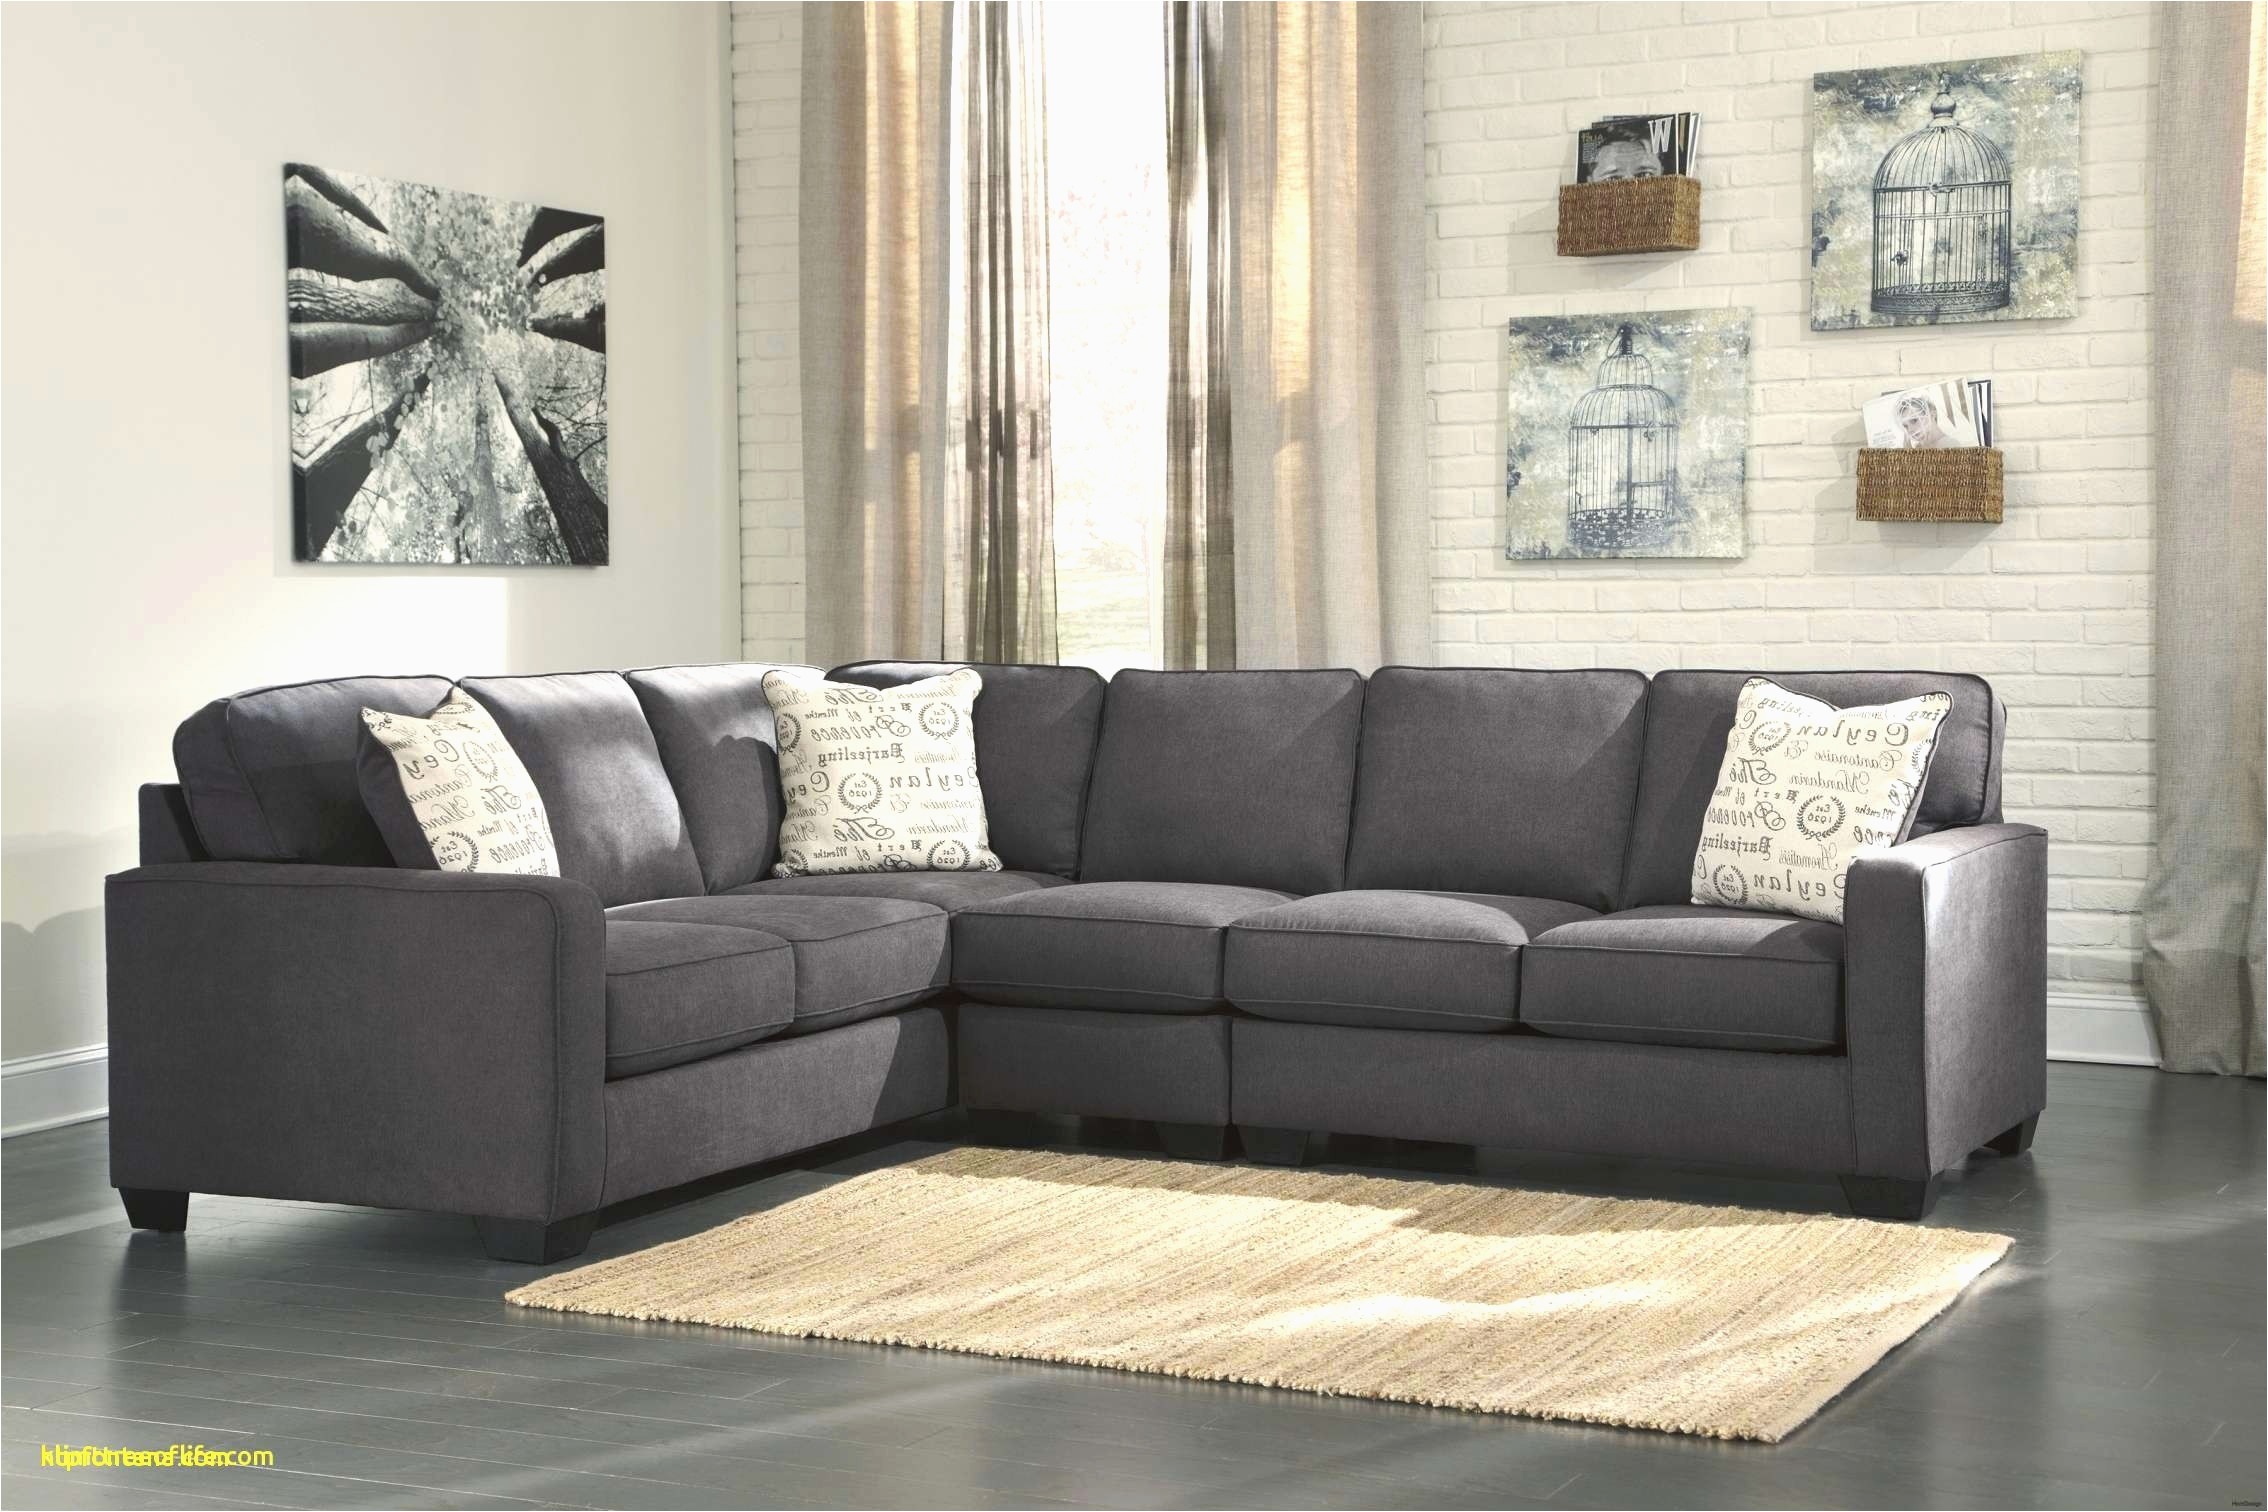 alenya flip charcoal sectional home design 3 piece sofa 0d 30 lovely small living room gray